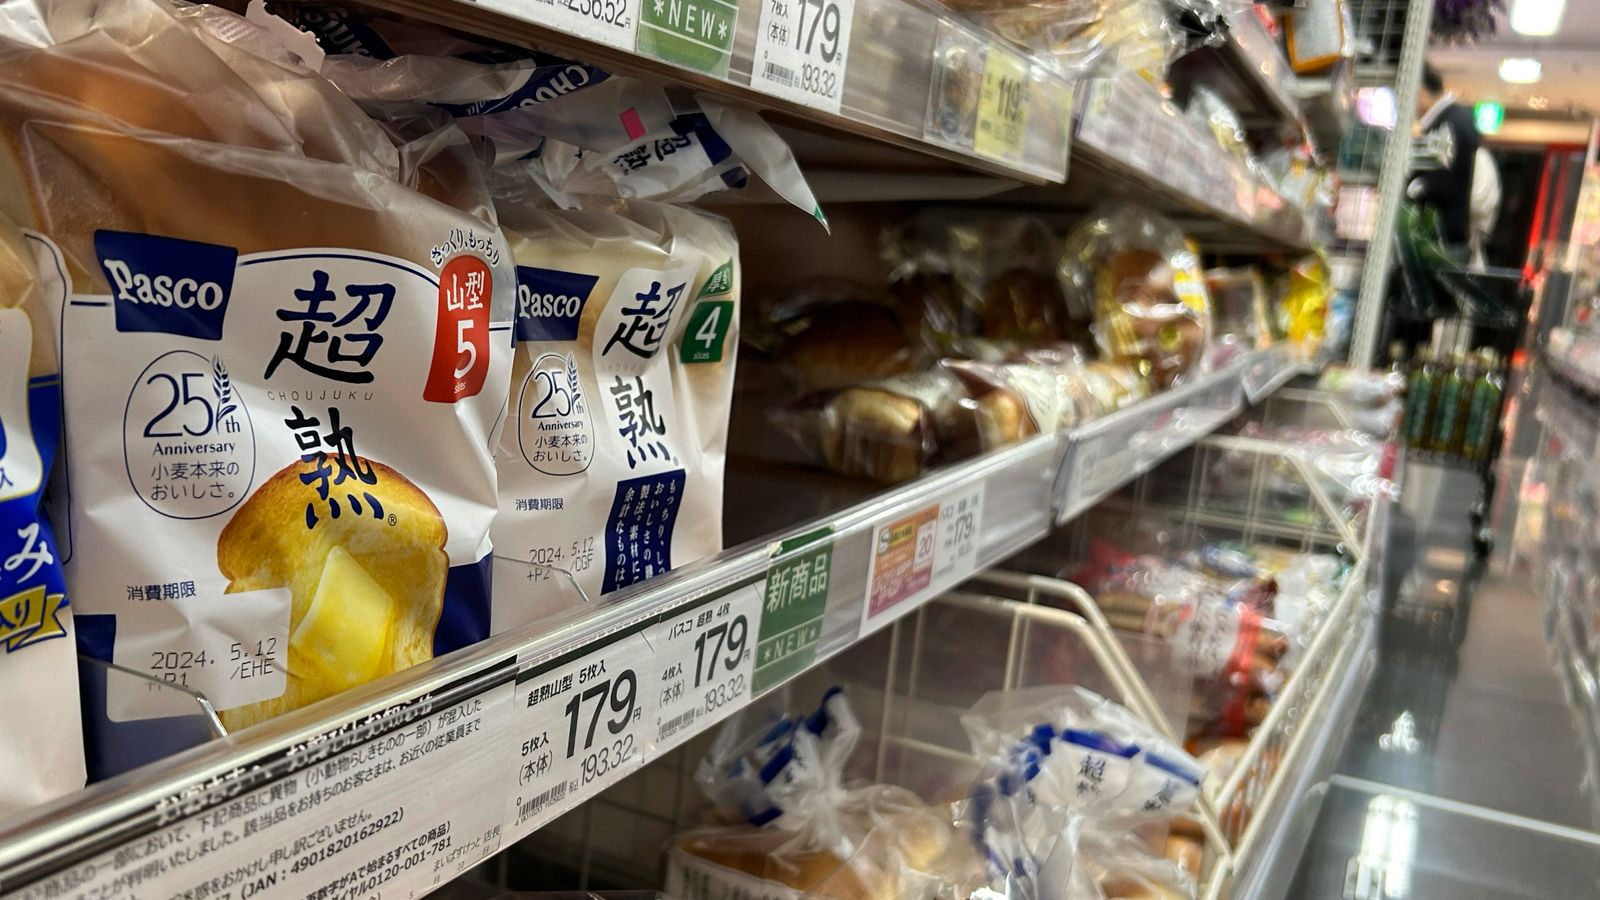 Japan bread recalled after ‘rat remains’ found inside loaves